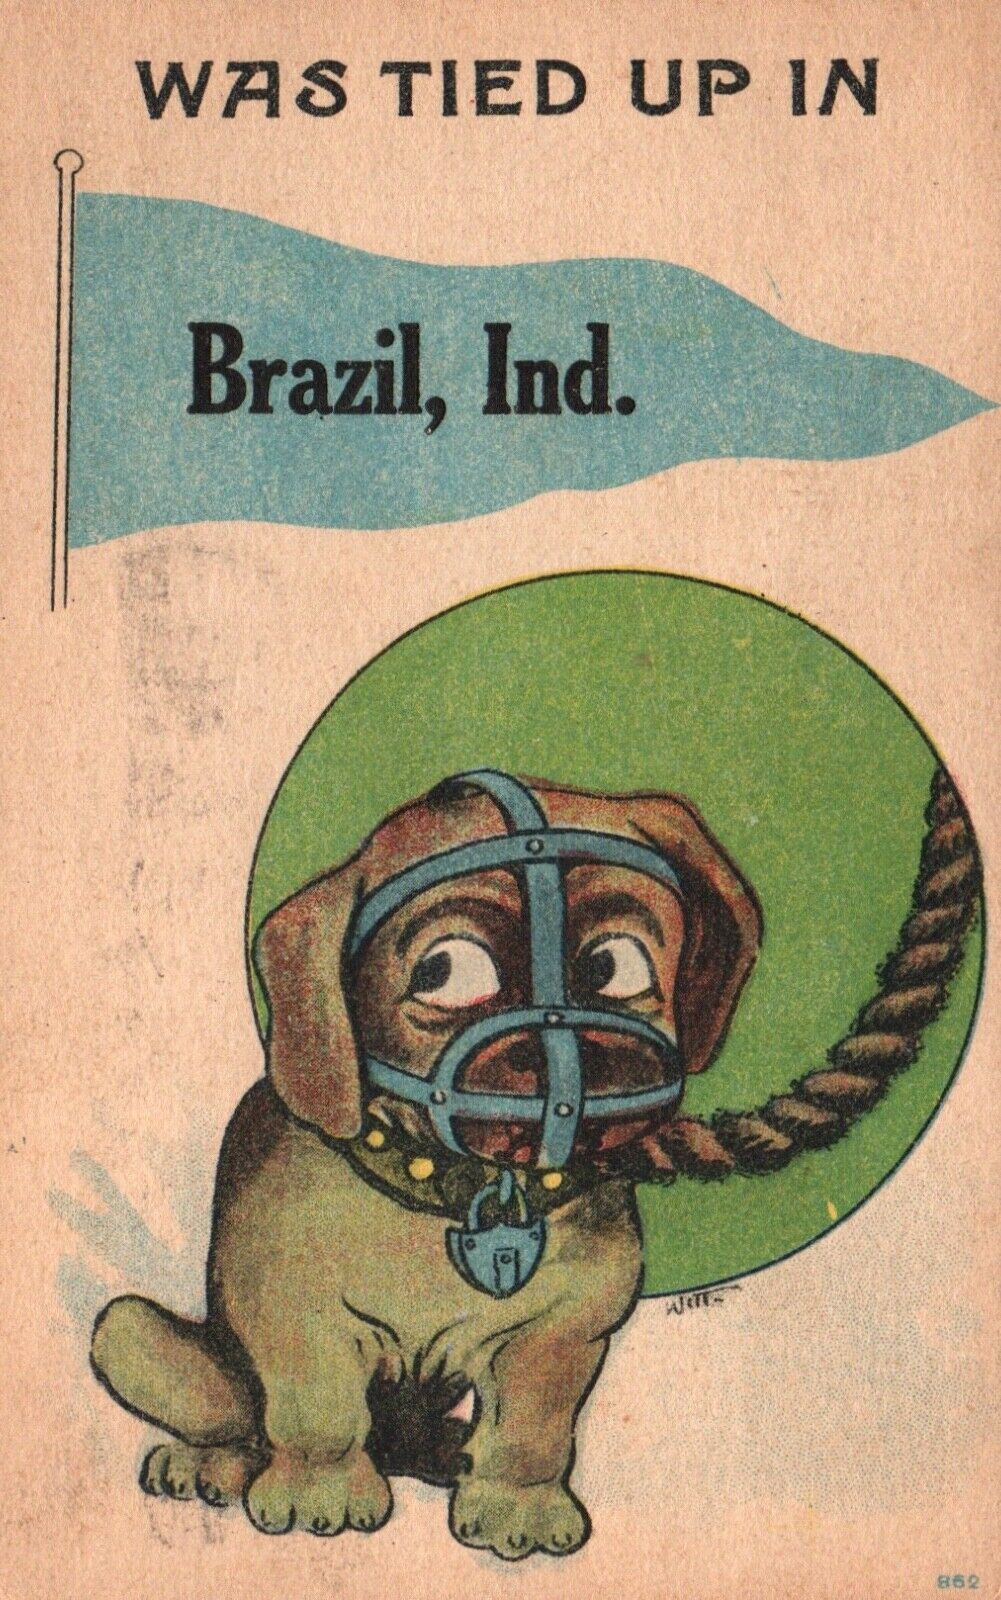 Brazil Indiana Humor Postcard 1918 Was Tied up in Brazil Ind Dog Posted